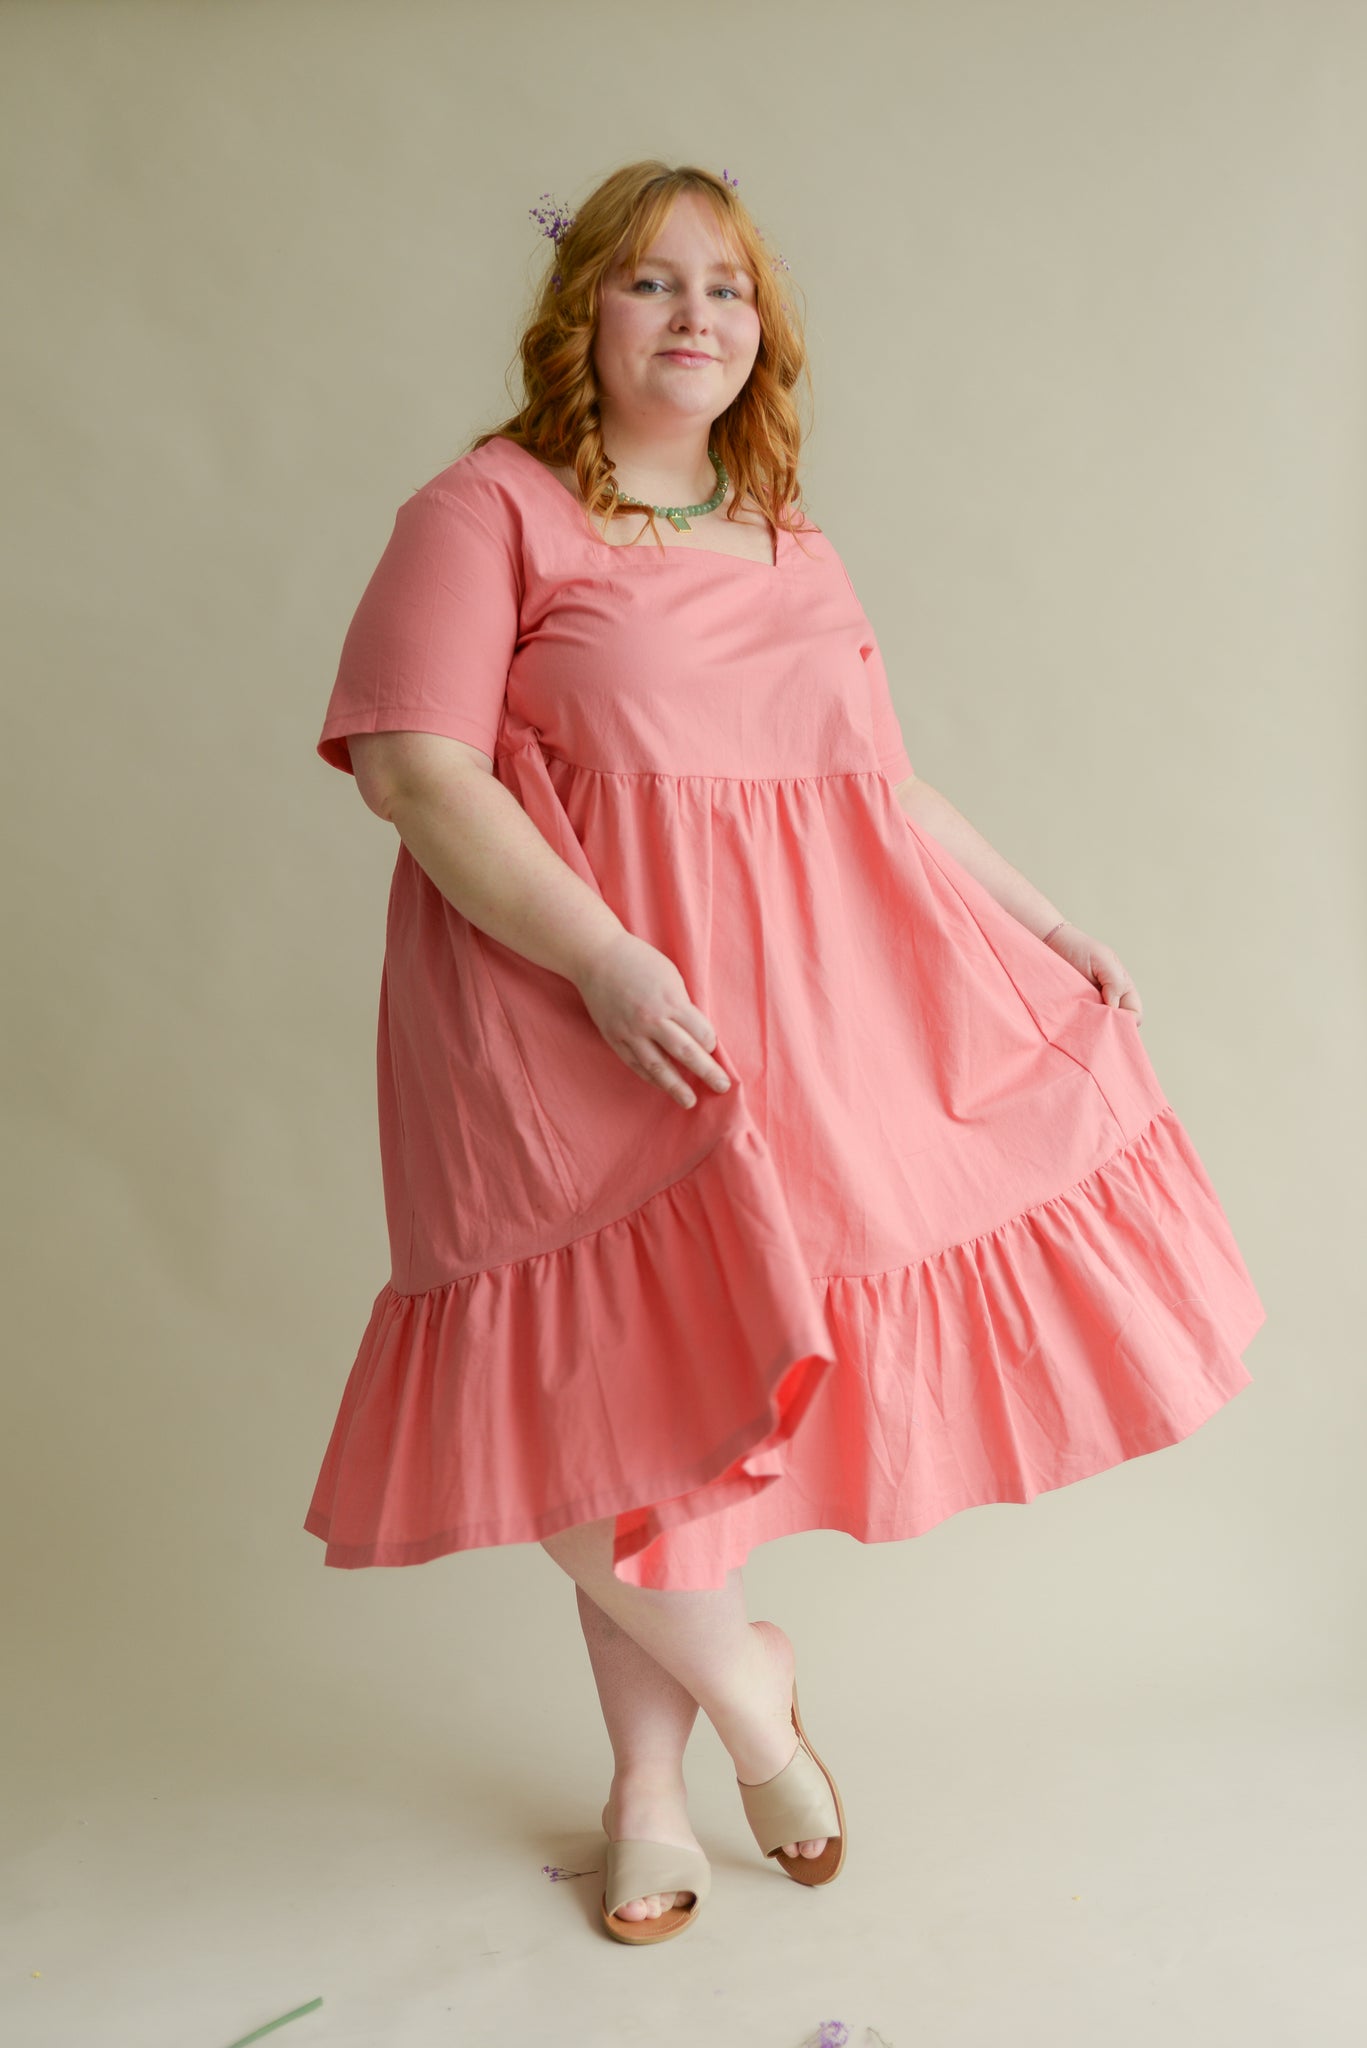 plus size model wearing a bright pink tiered midi dress with a square neckline